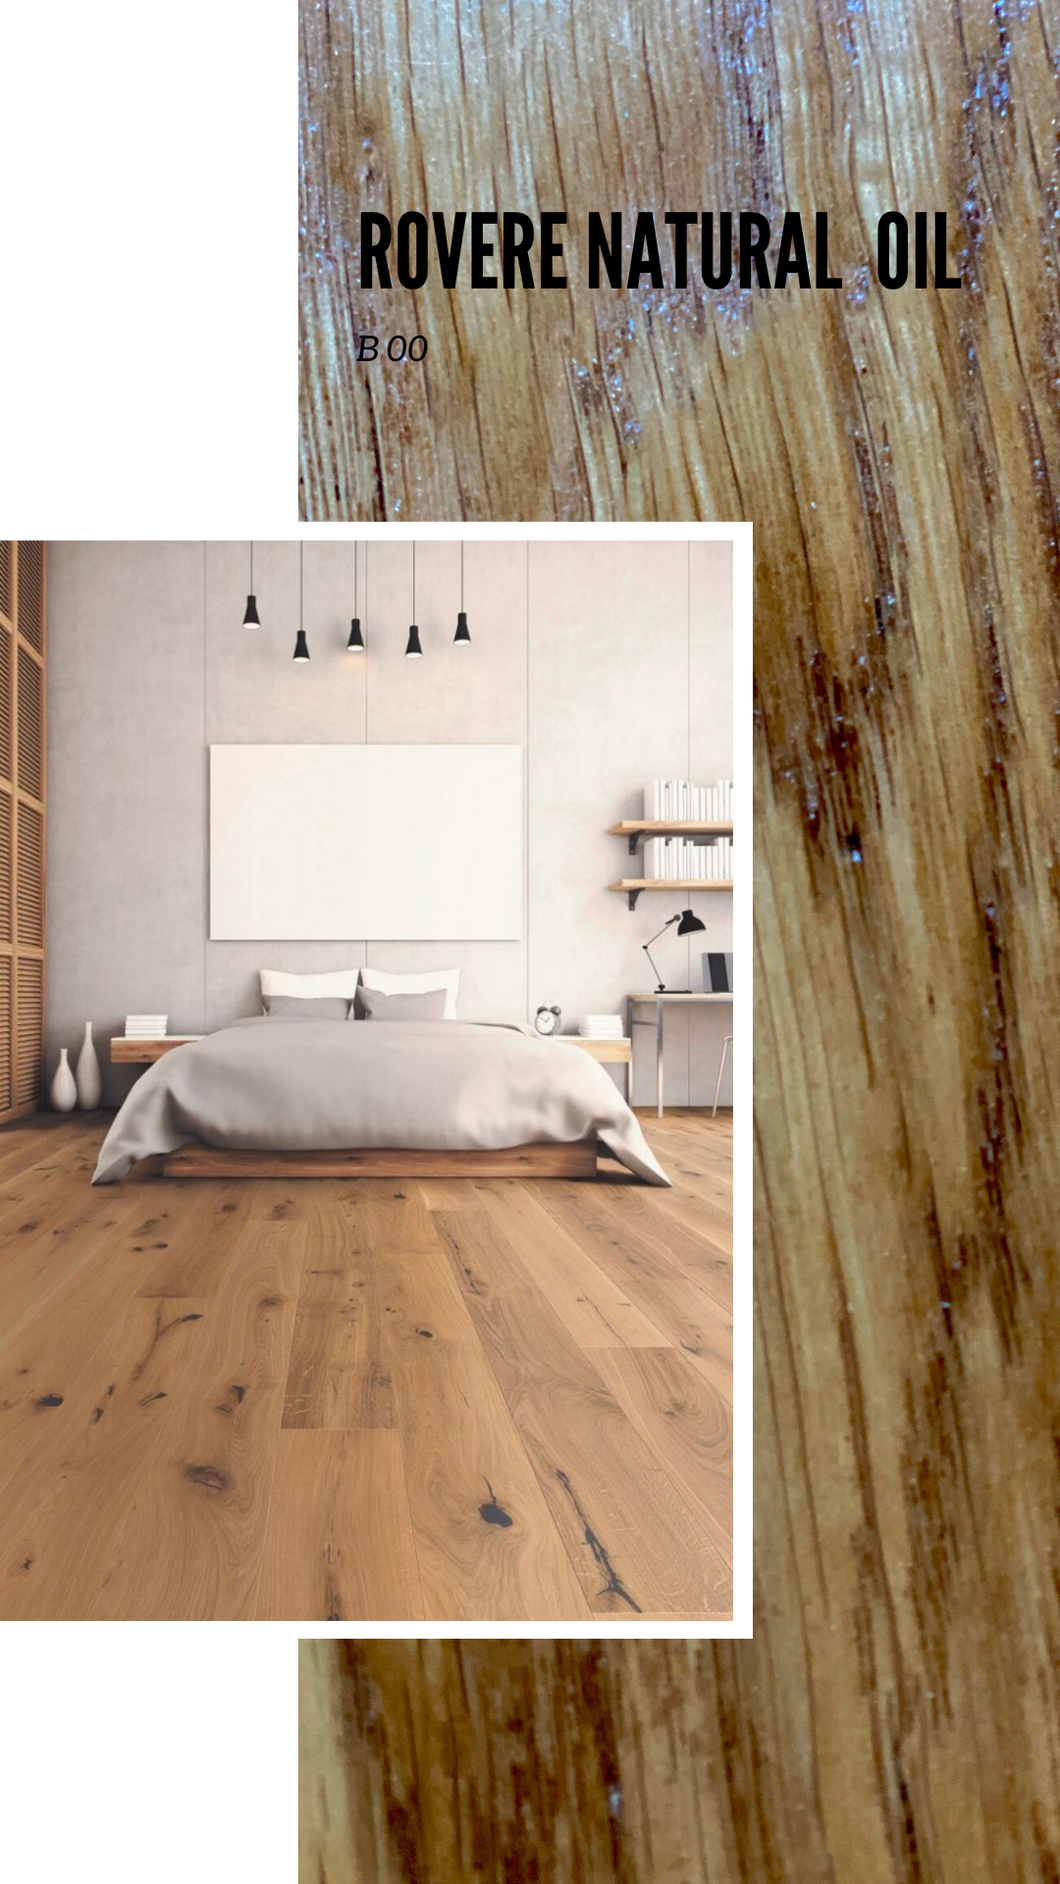 Rovere Natural Oil